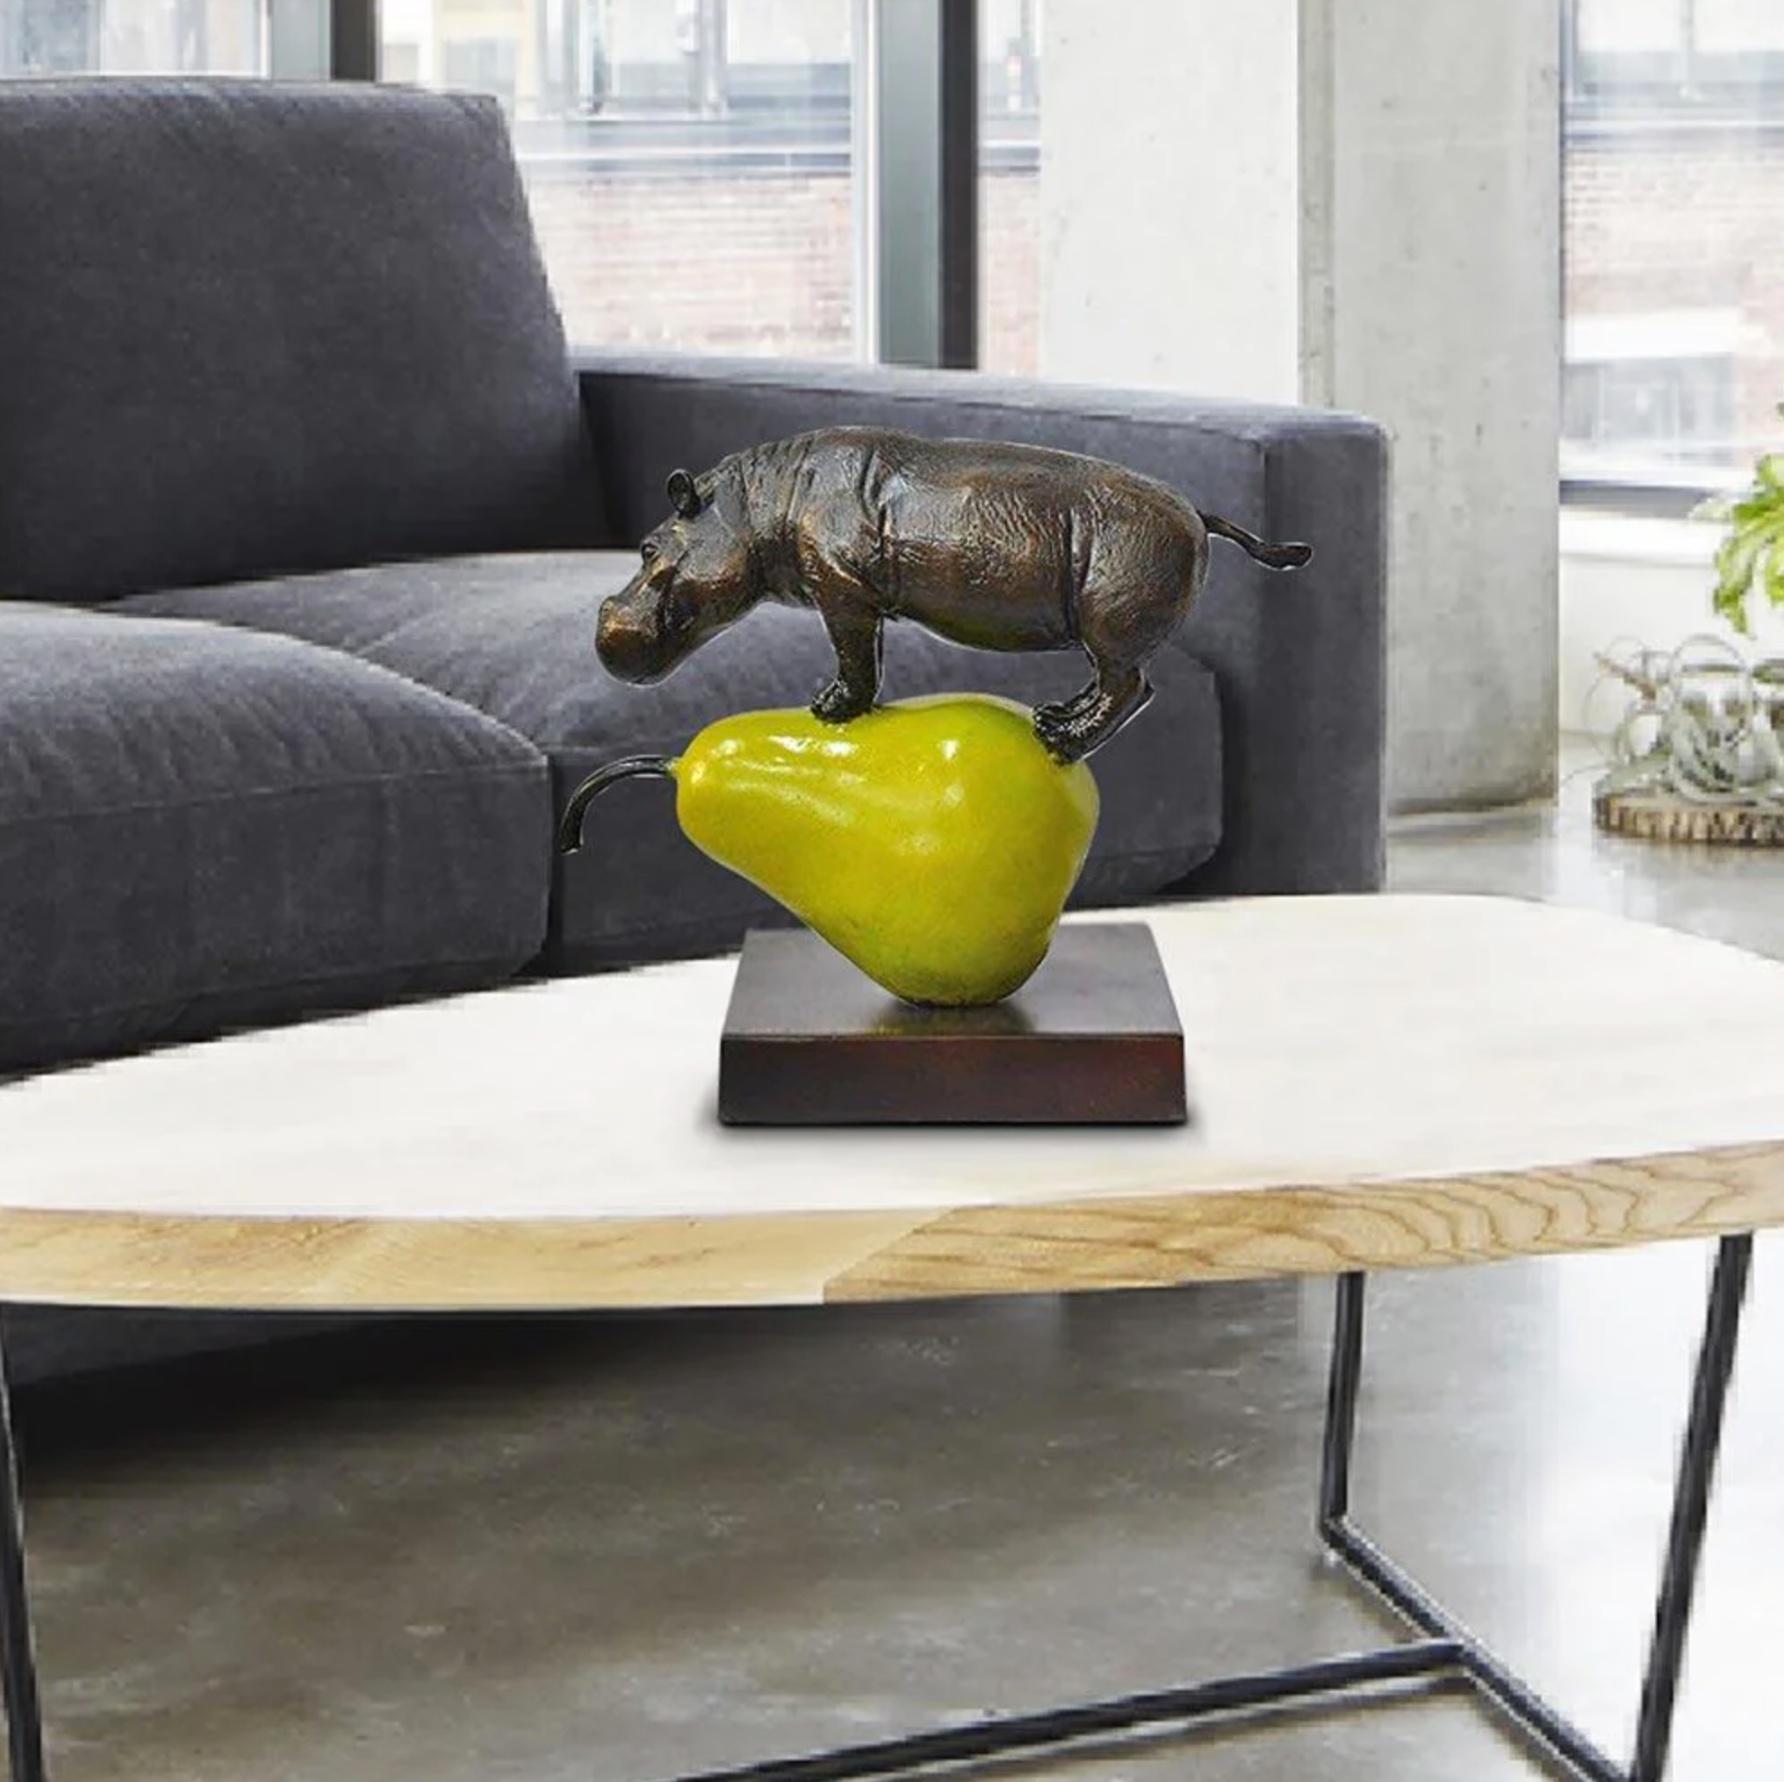 Title: The hippo was just pearfect
Authentic Small Bronze Sculpture

This authentic bronze sculpture titled 'The hippo was just pearfect' by artists Gillie and Marc has been meticulously crafted in bronze with gold patina . This sculpture features a